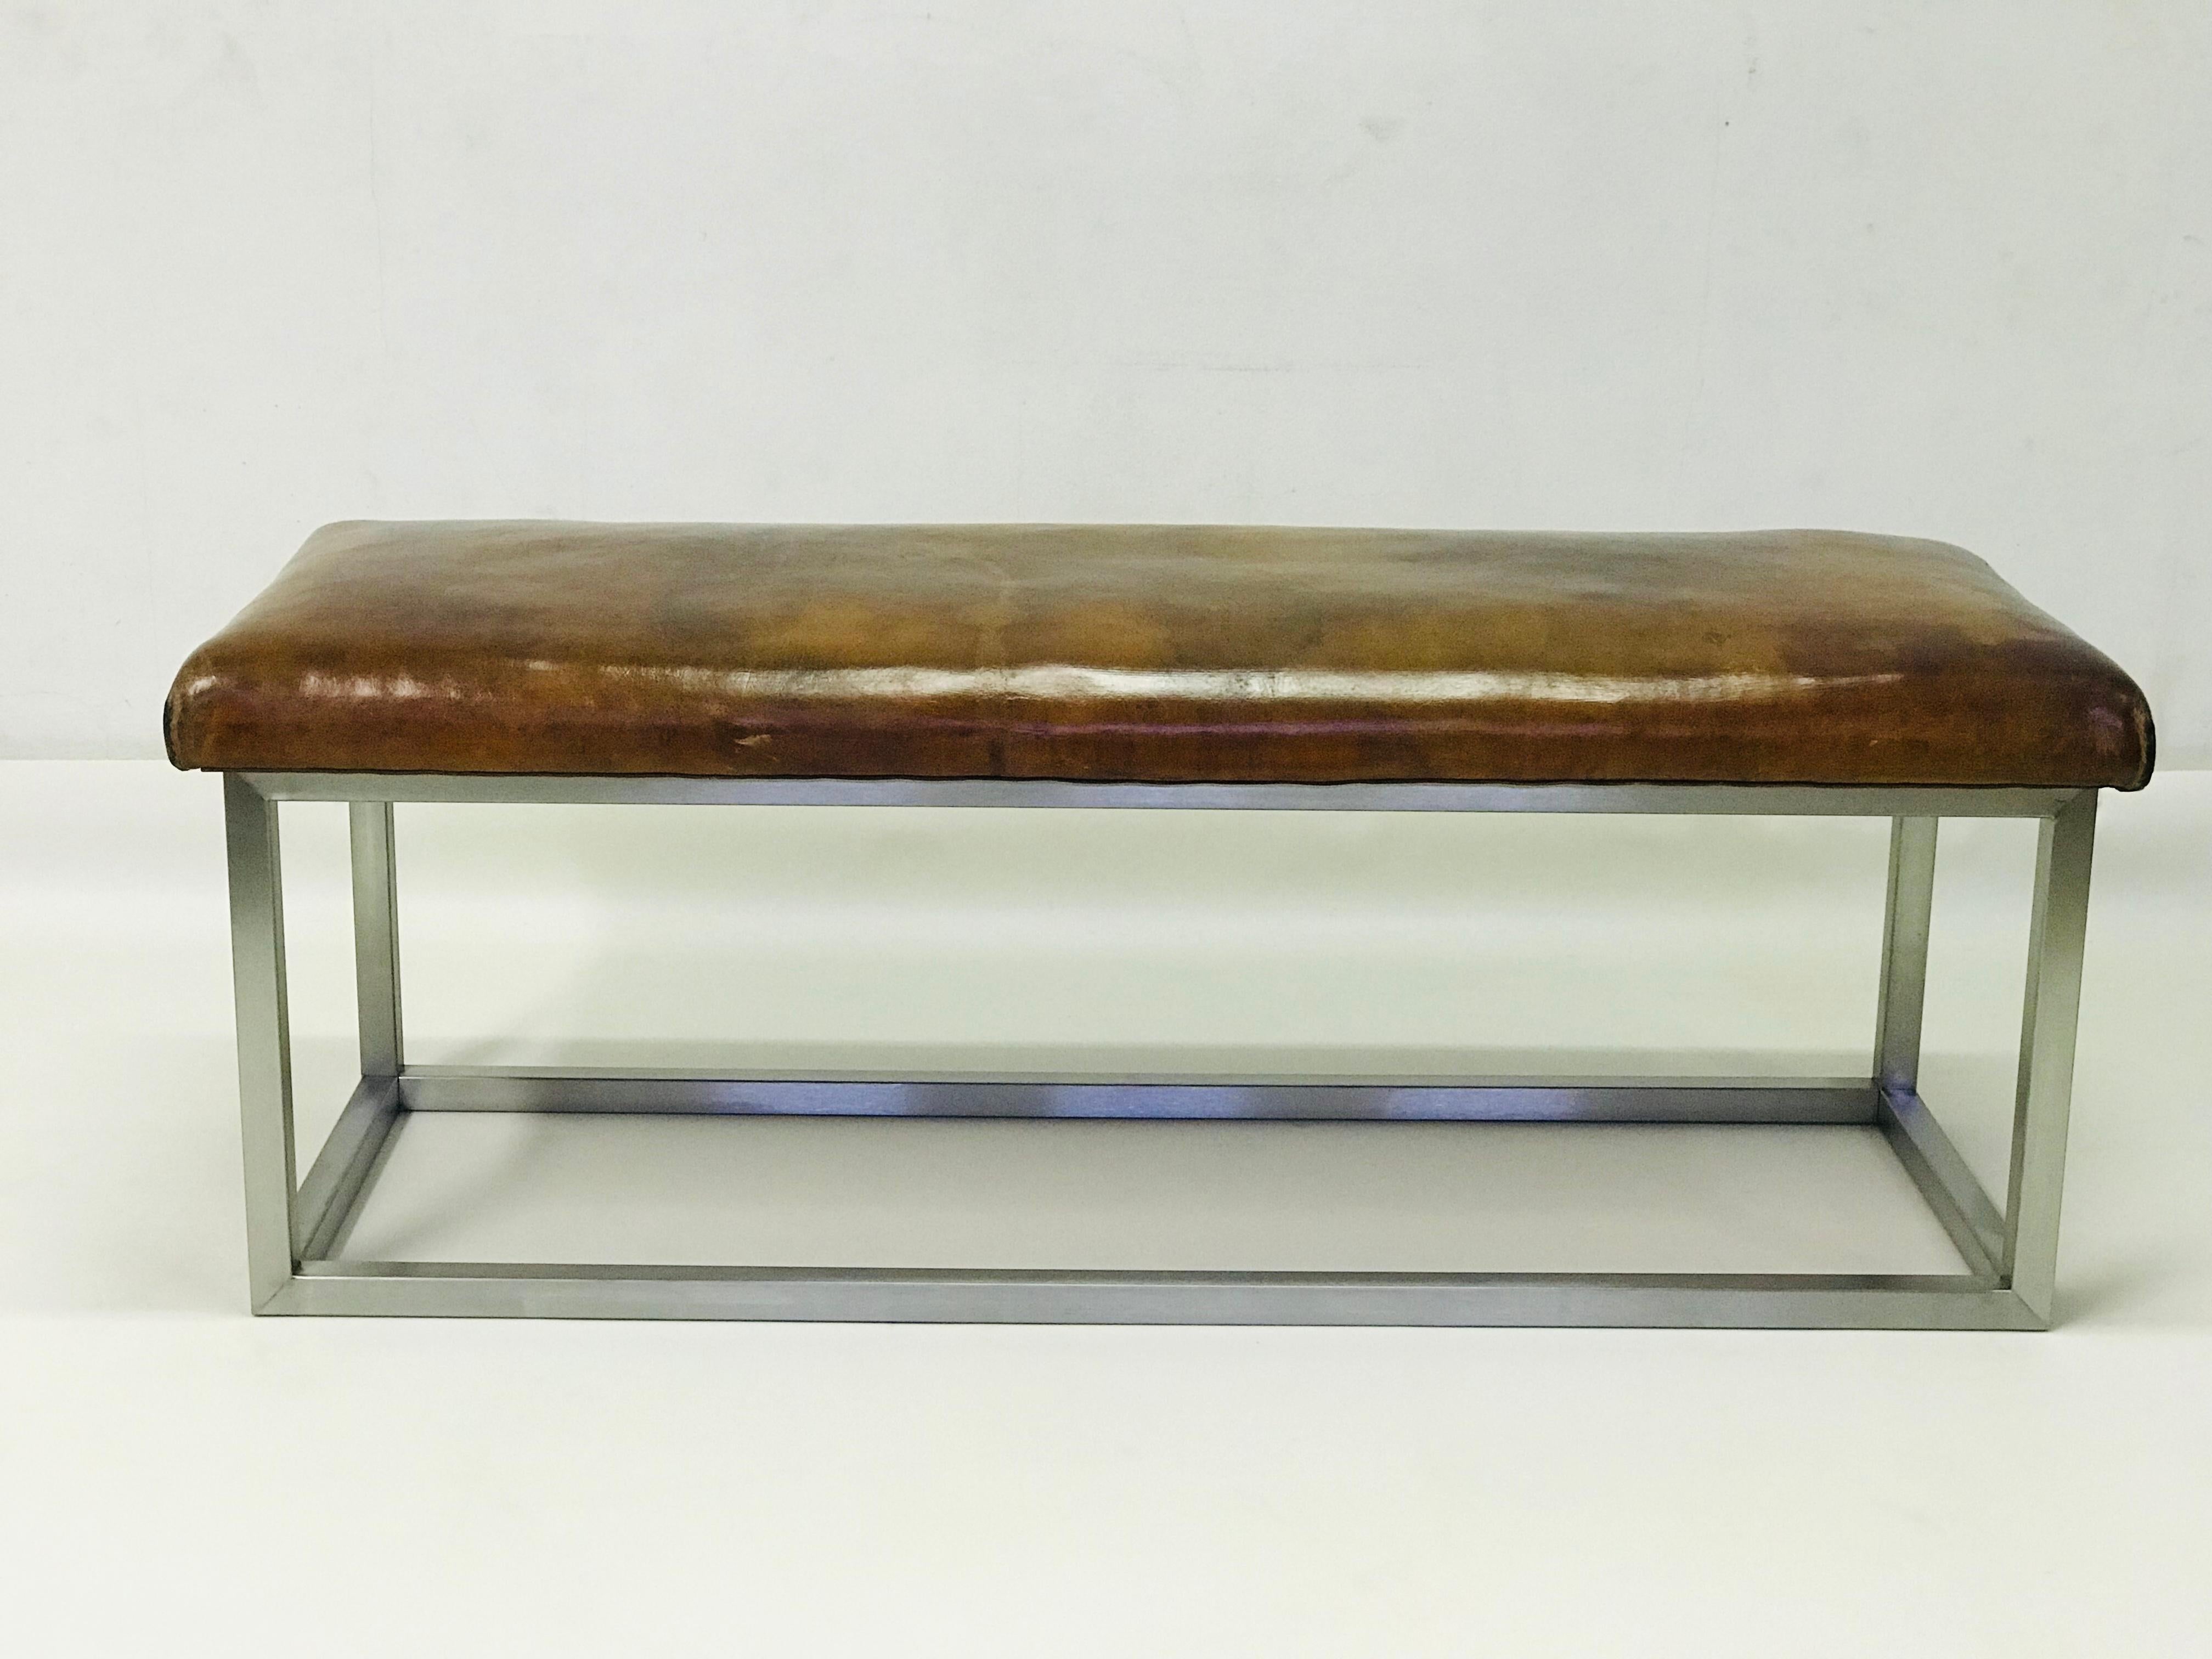 The bench has strong leather completed the stainless steel construction. The leather is in the original patina.